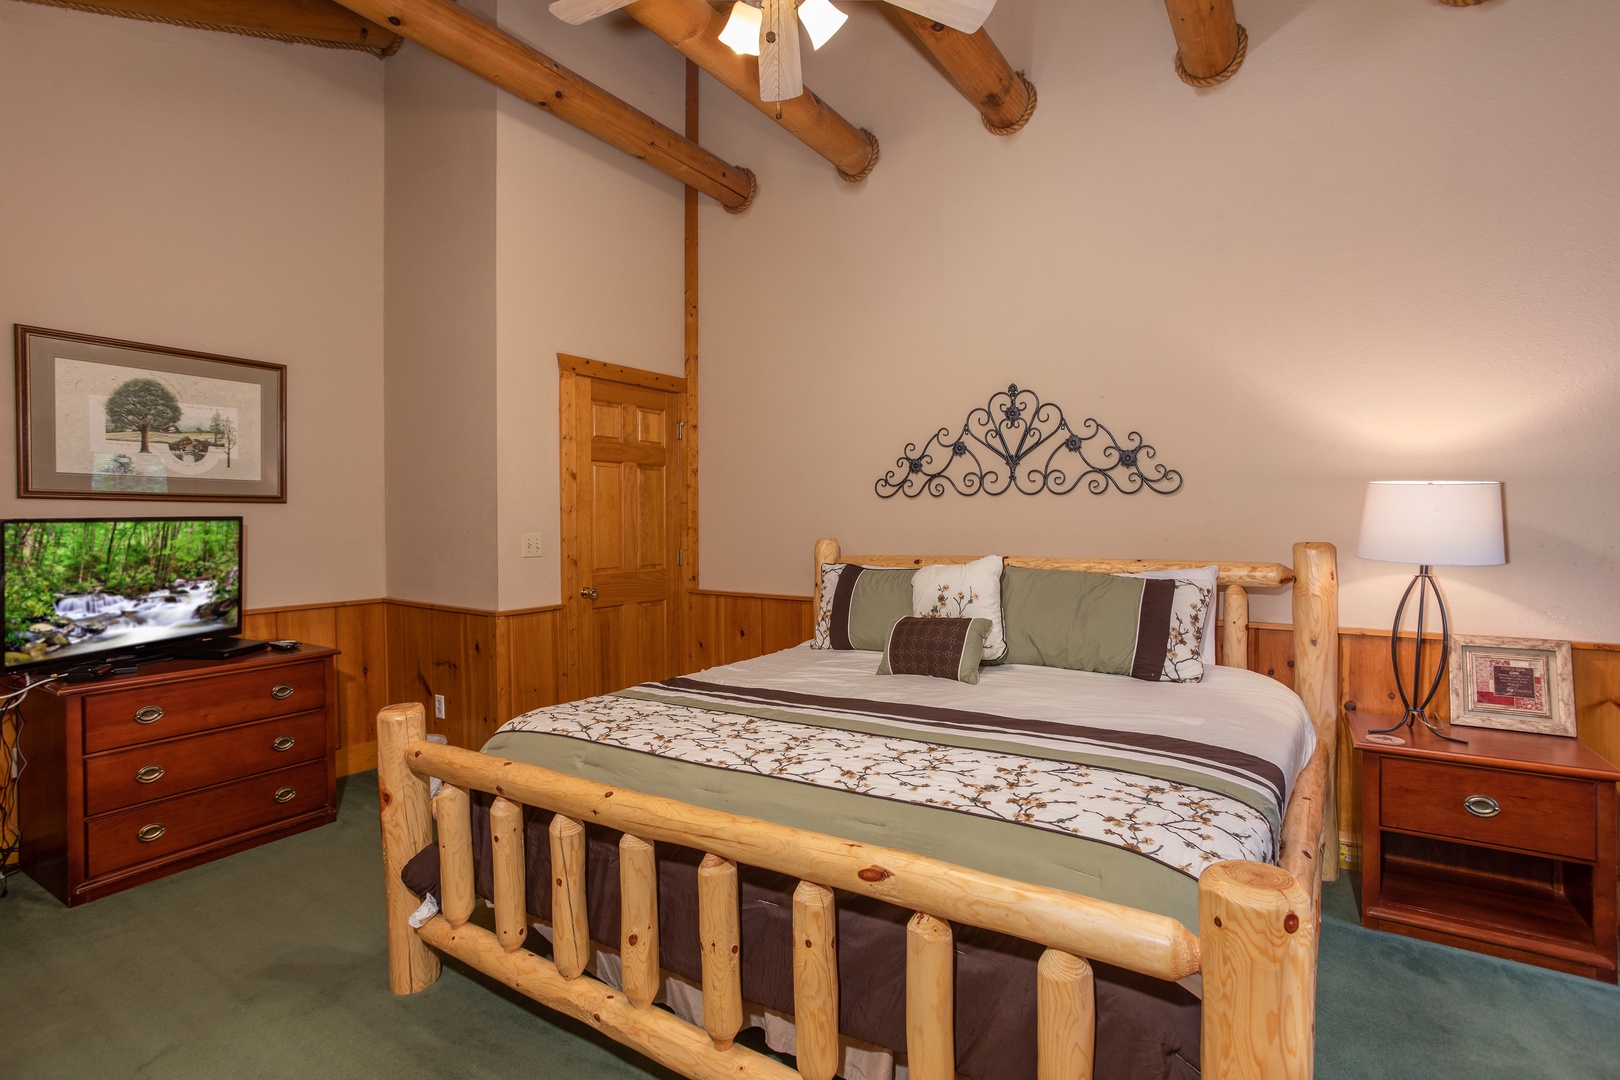 Bedroom with a king log bed, dresser, and TV at Starry Starry Night #725, a 2 bedroom cabin rental located in Pigeon Forge